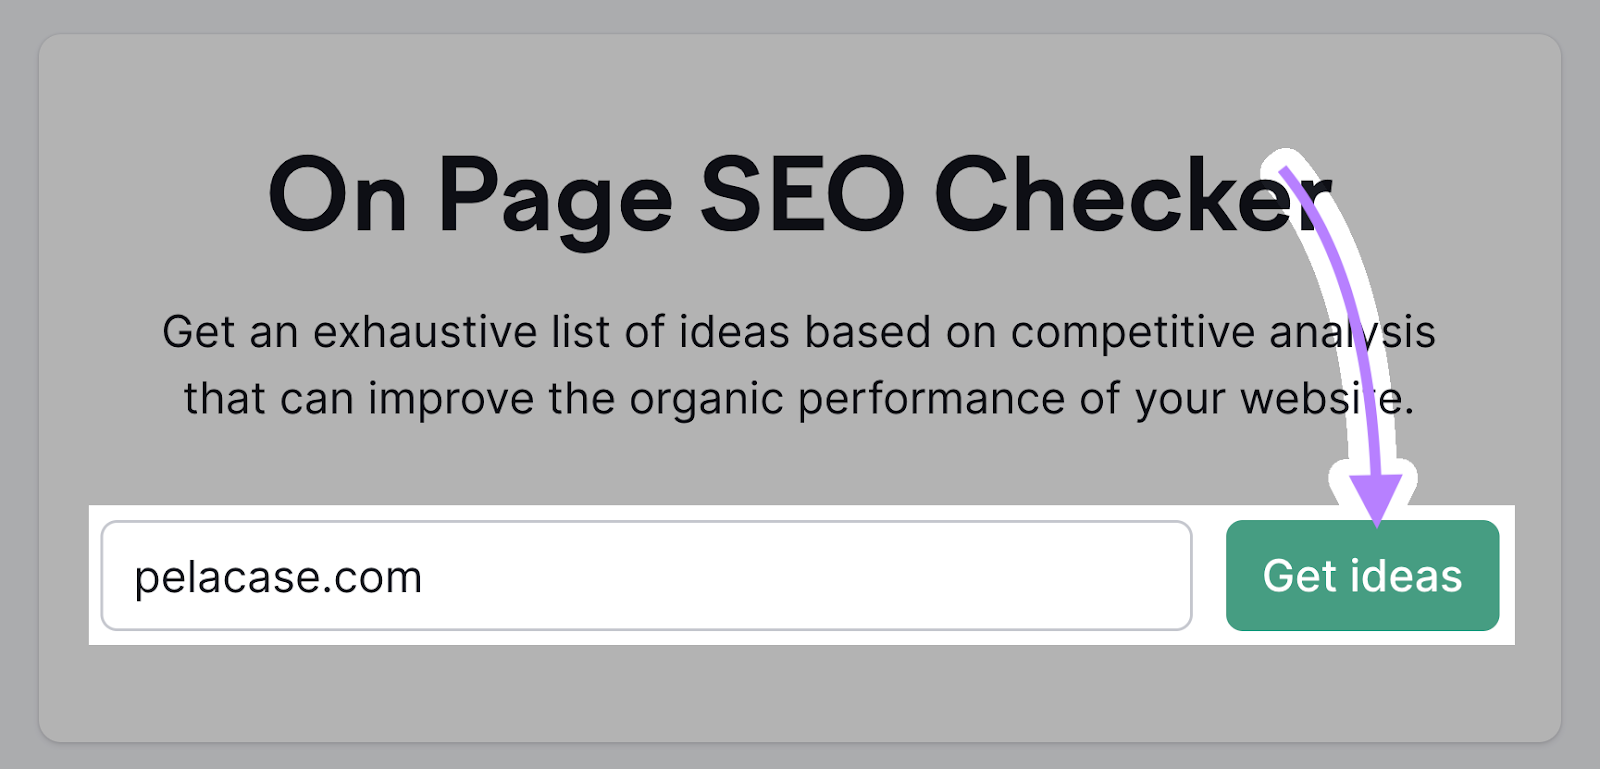 “Get ideas” in Semrush’s On Page SEO Checker